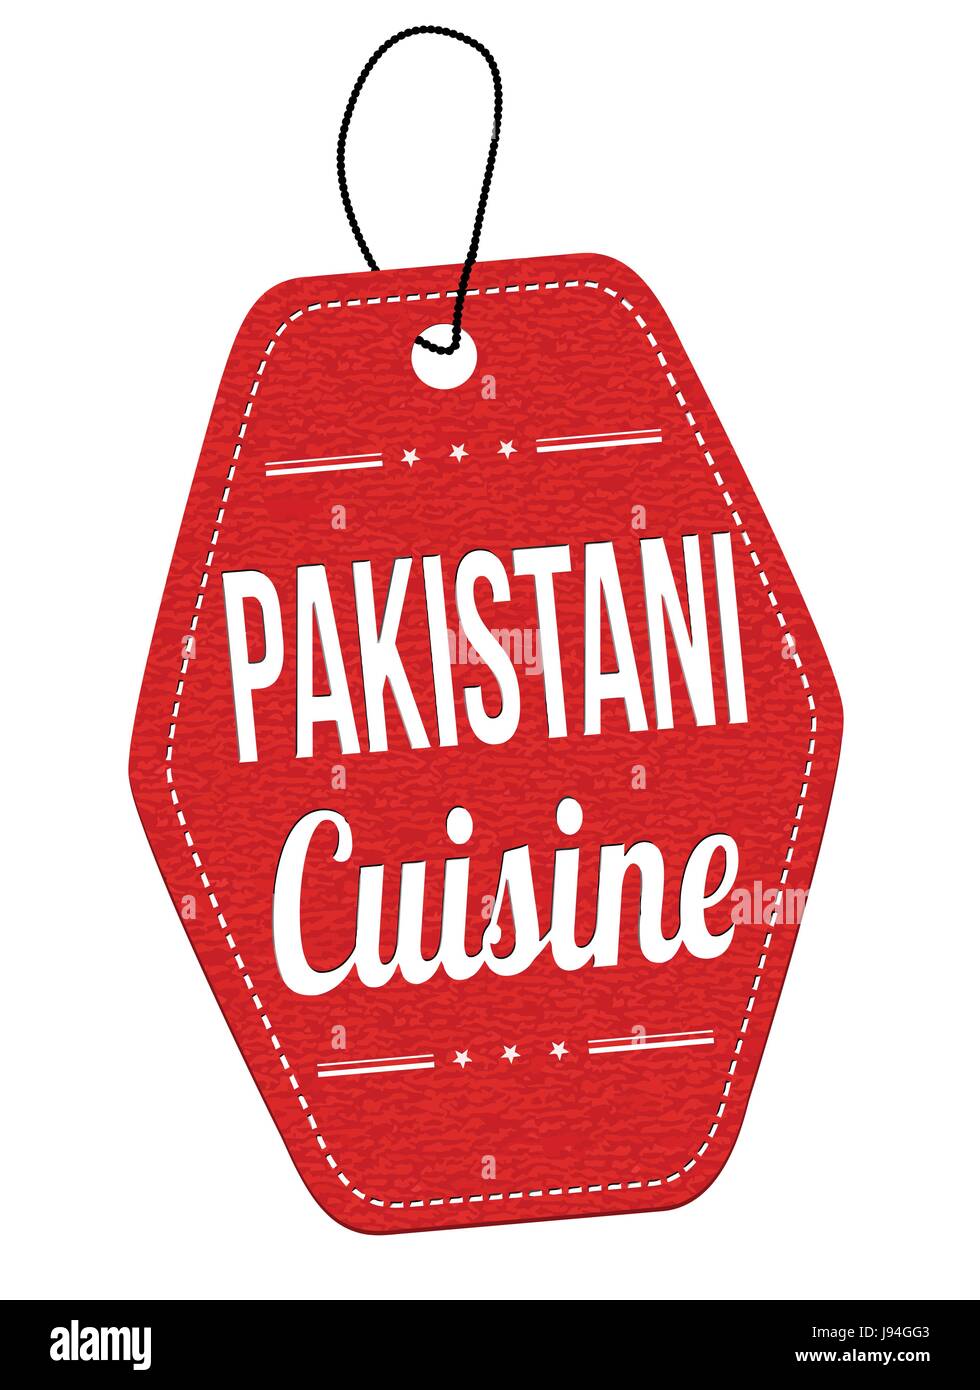 Pakistani cuisine red leather label or price tag on white background, vector illustration Stock Vector